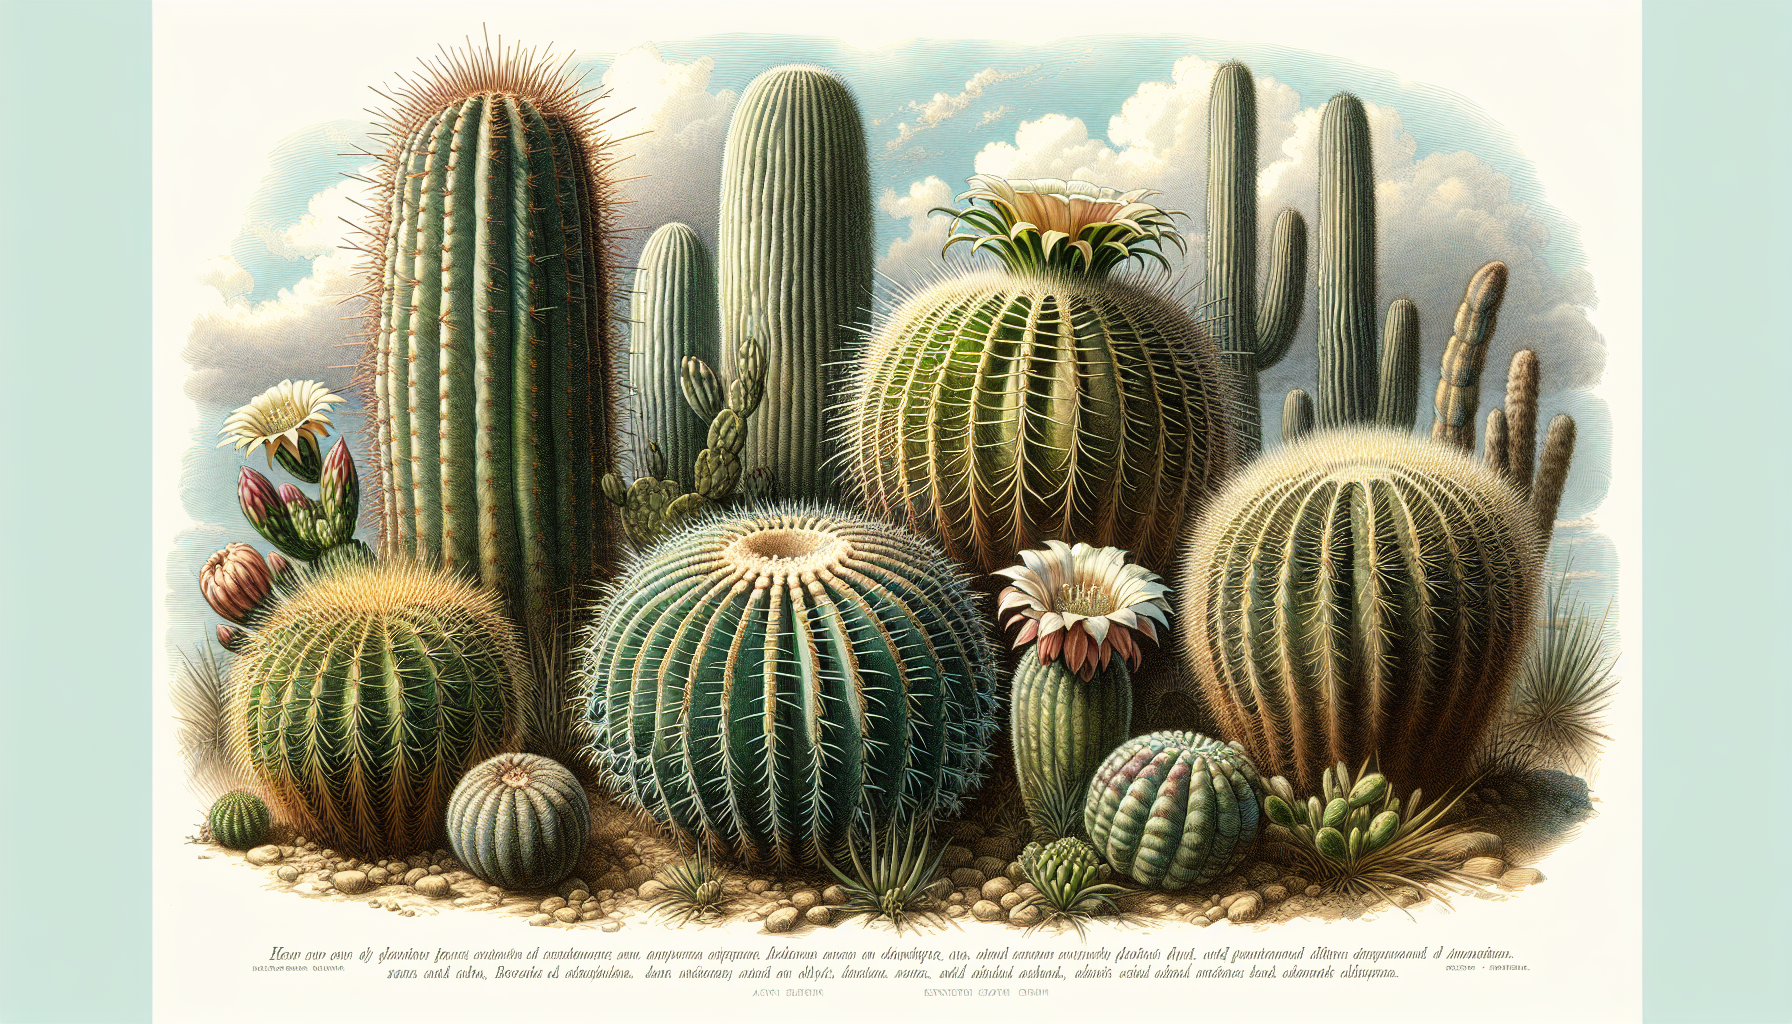 Exploring Different Types of Barrel Cacti